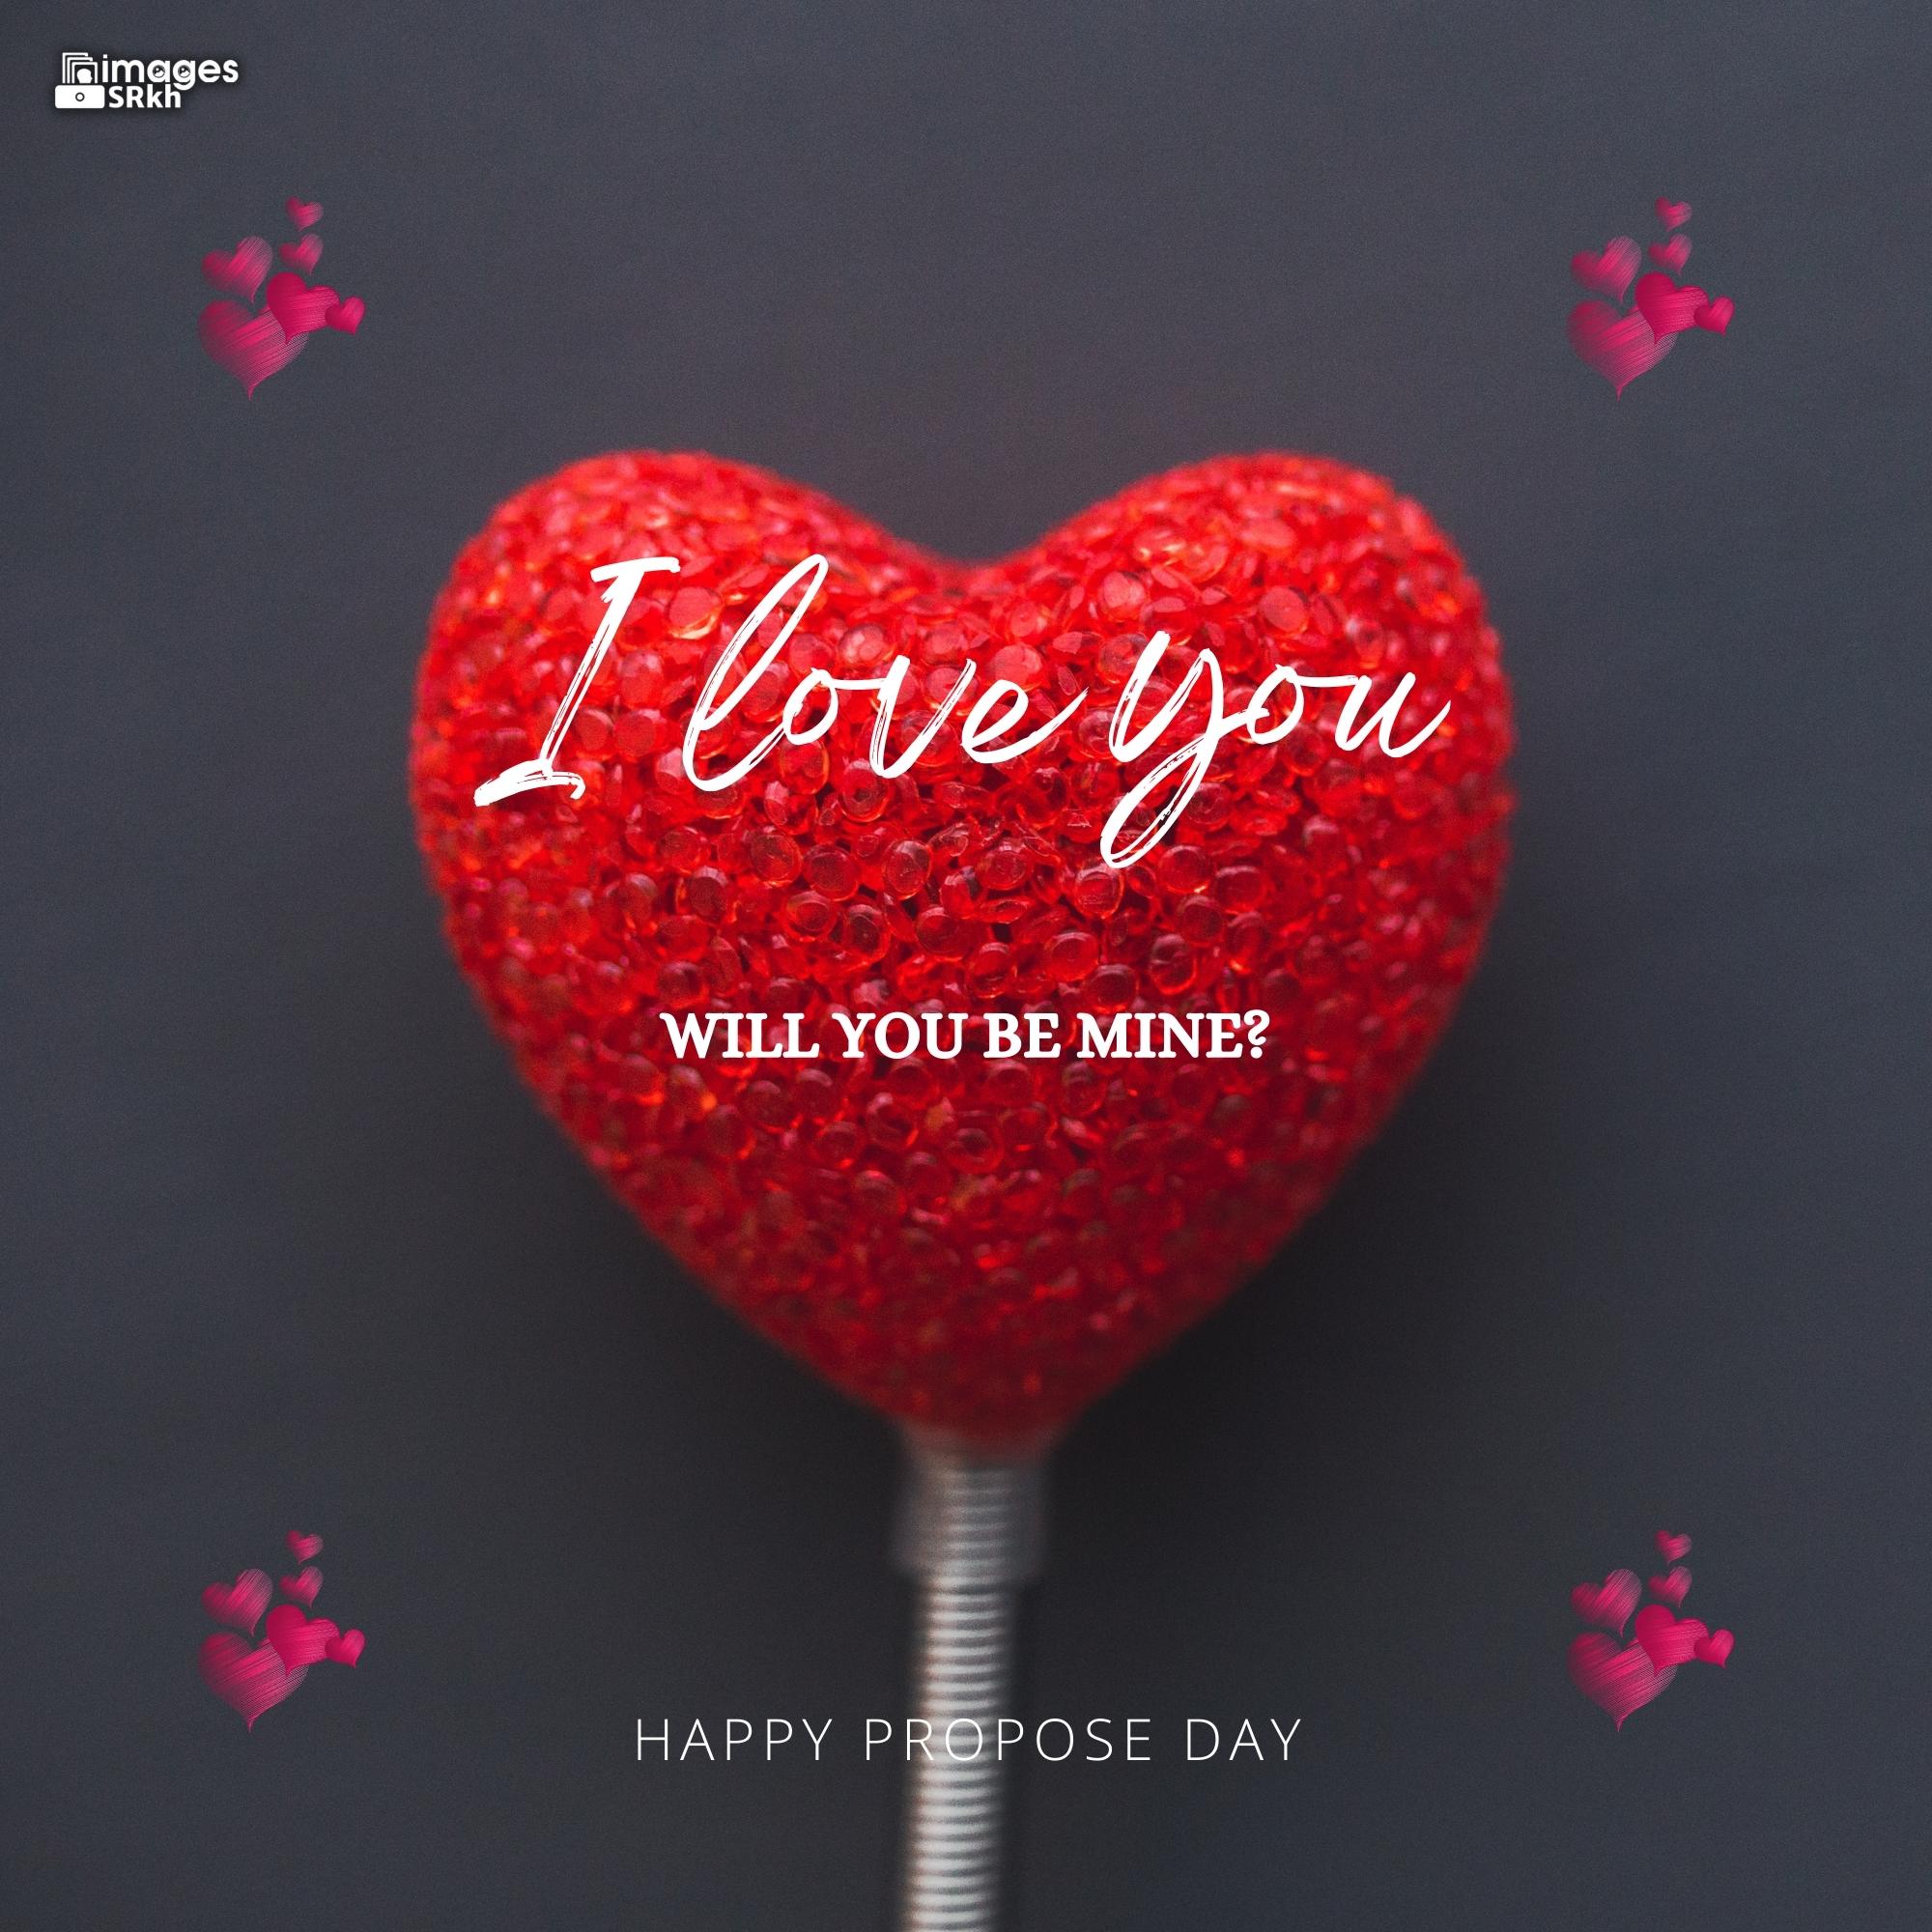 Happy Propose Day Images | 444 | I love you will you be mine